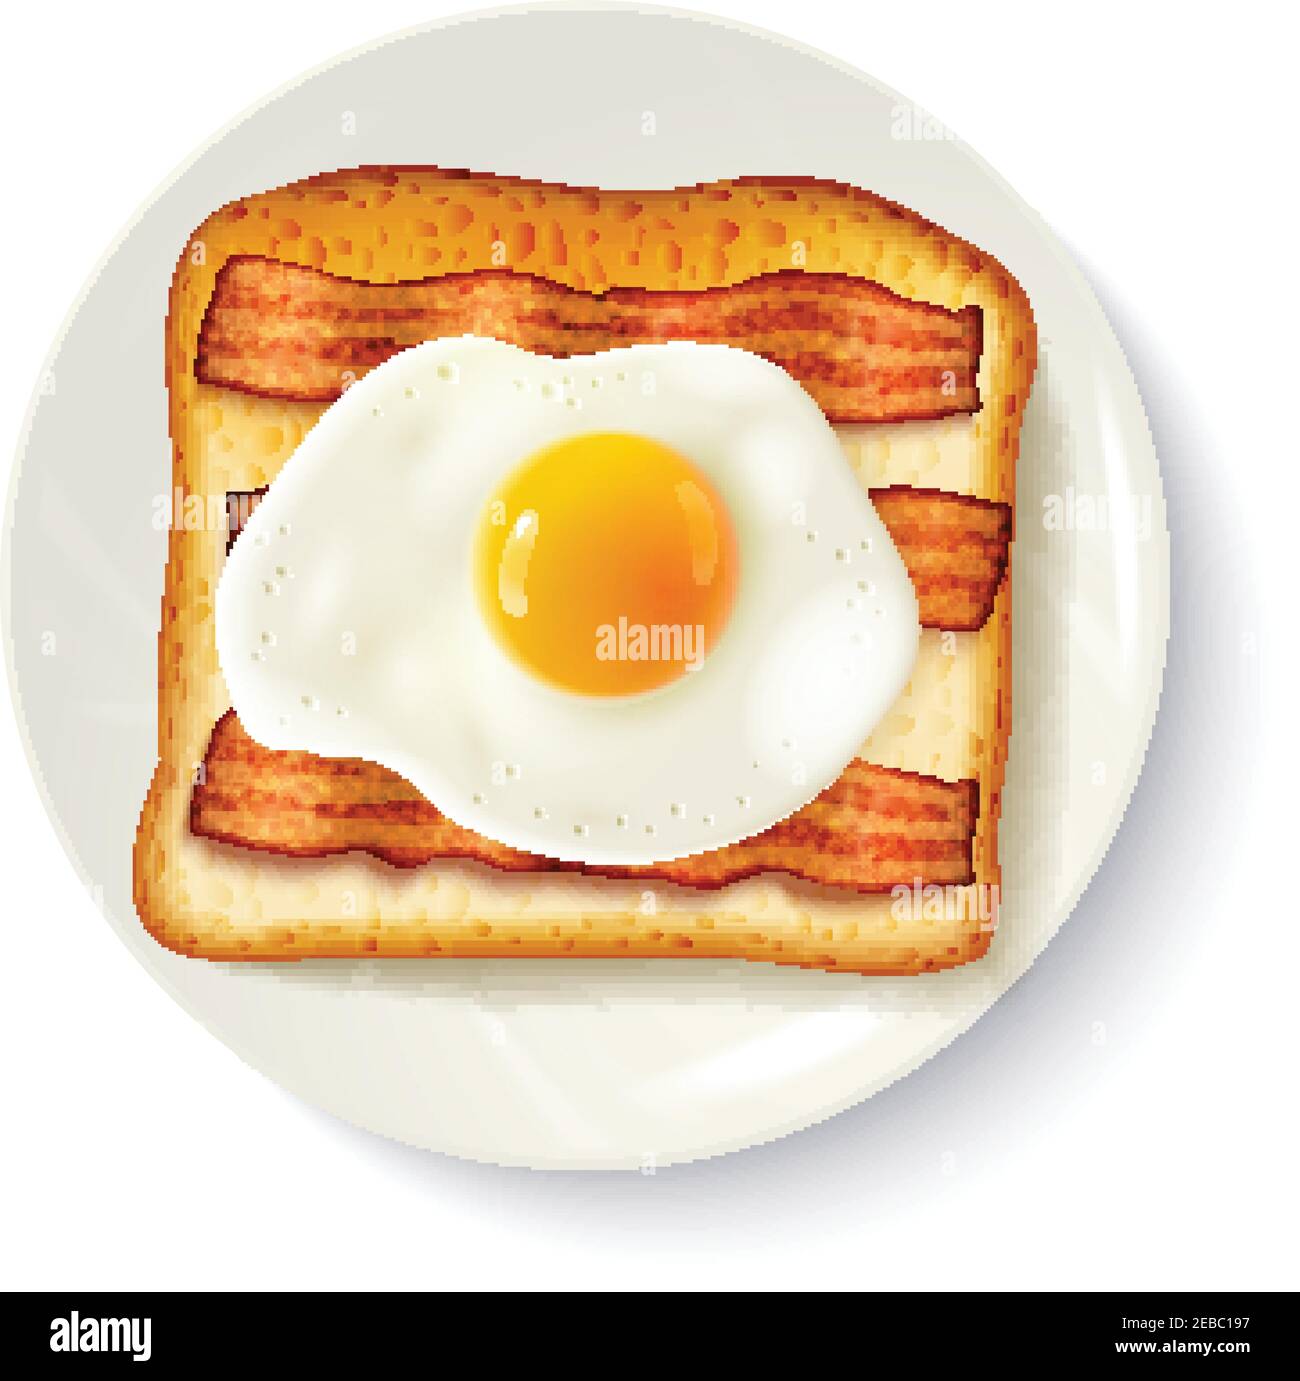 American breakfast food top view realistic image of toasted bread  fried egg and bacon on plate vector illustration Stock Vector